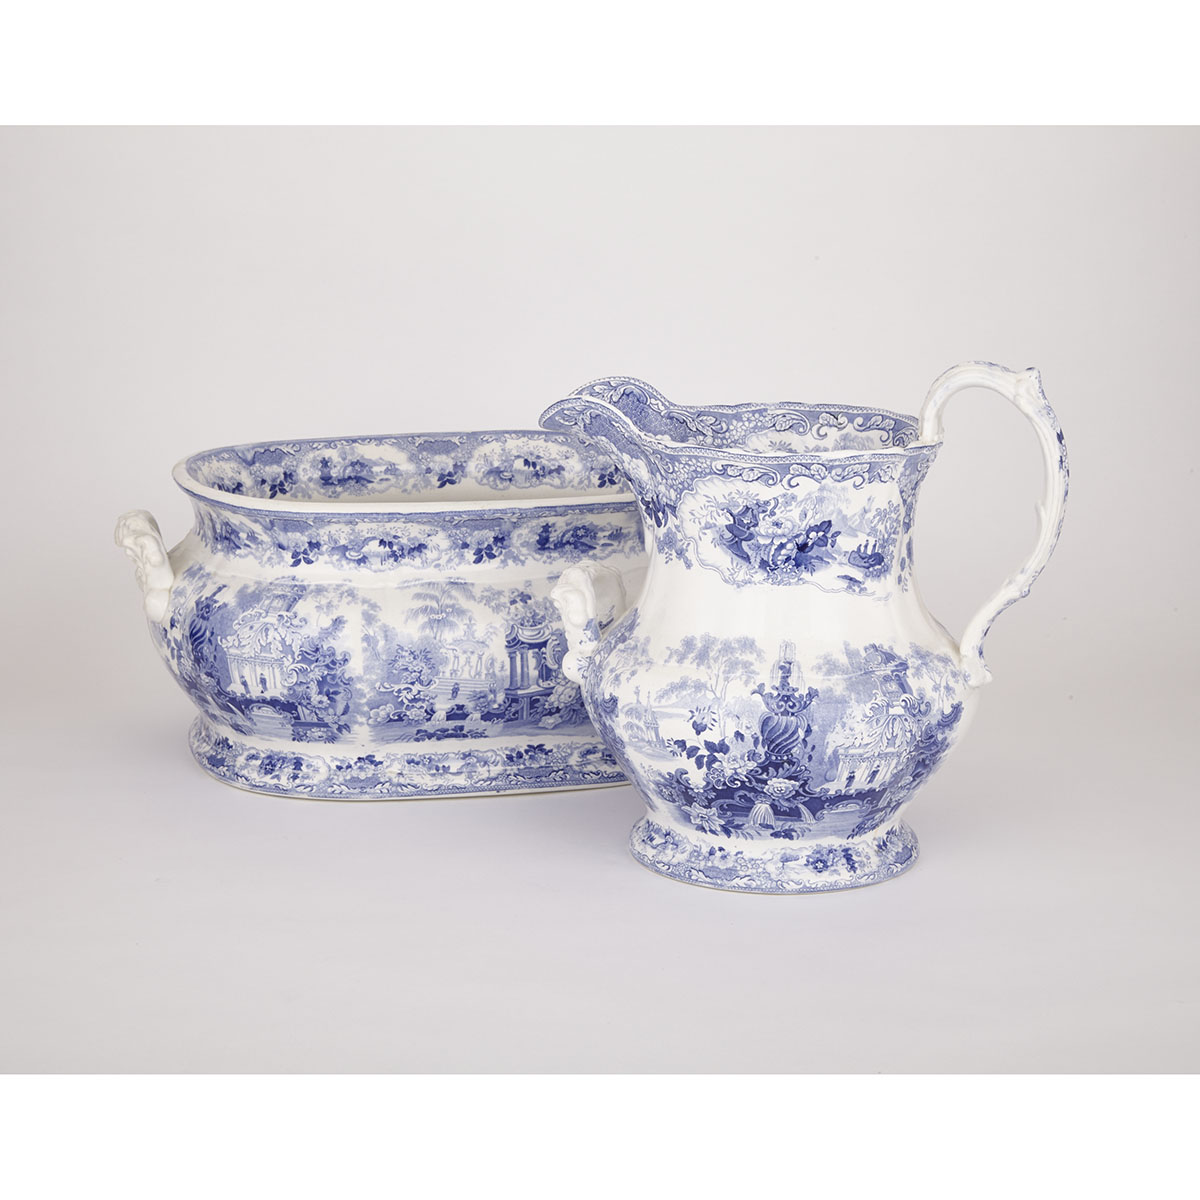 English Blue Printed ‘Sicilian’ Pattern Foot Bath and Water Pitcher, probably Pountney & Allies of Bristol, c.1830-40